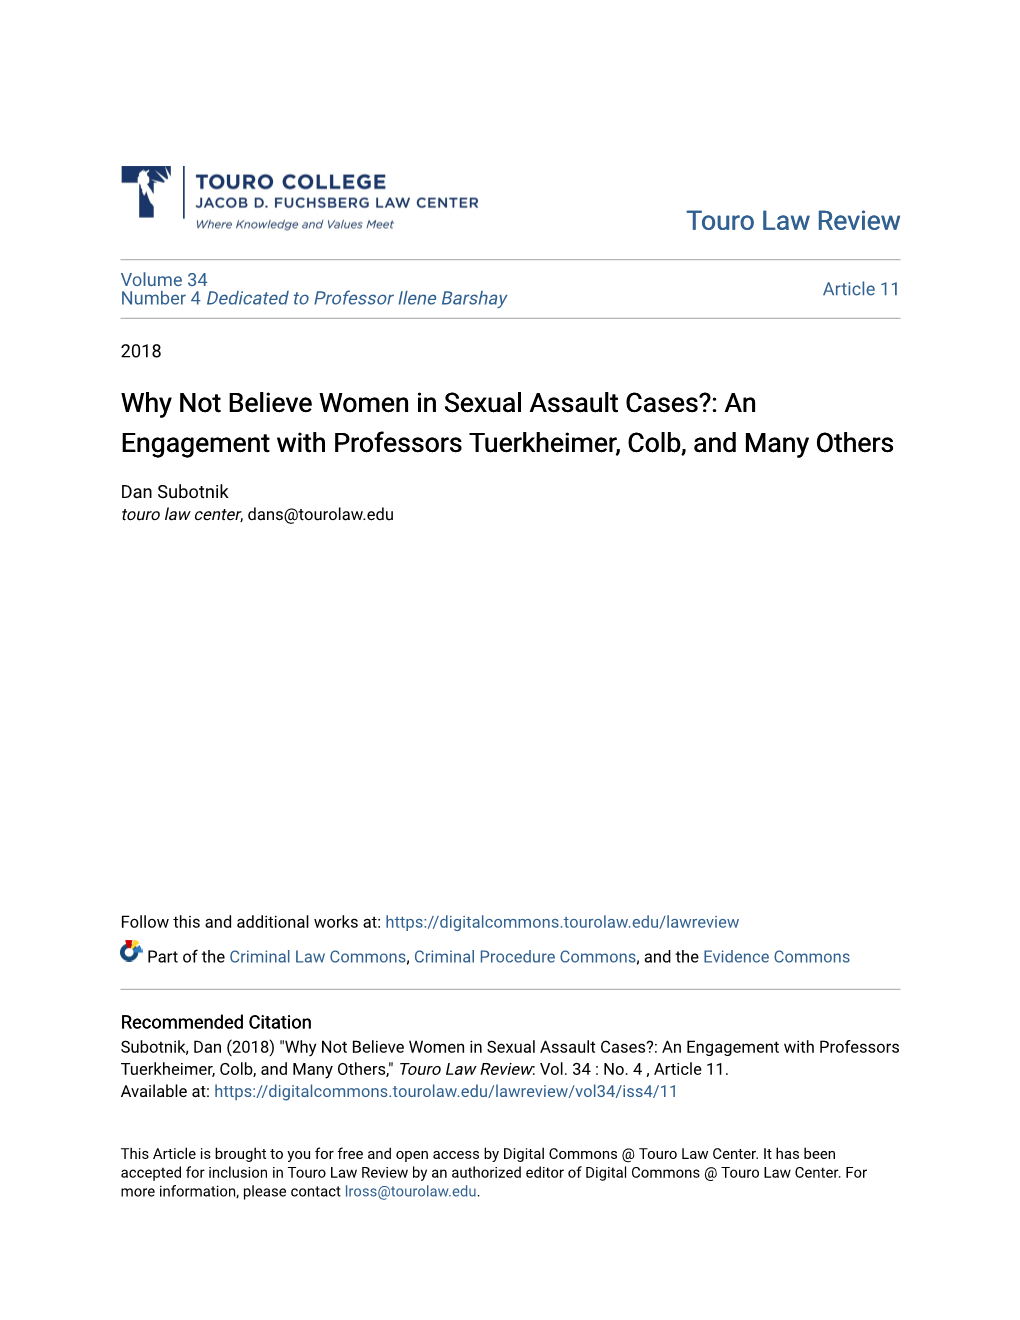 Why Not Believe Women in Sexual Assault Cases?: an Engagement with Professors Tuerkheimer, Colb, and Many Others